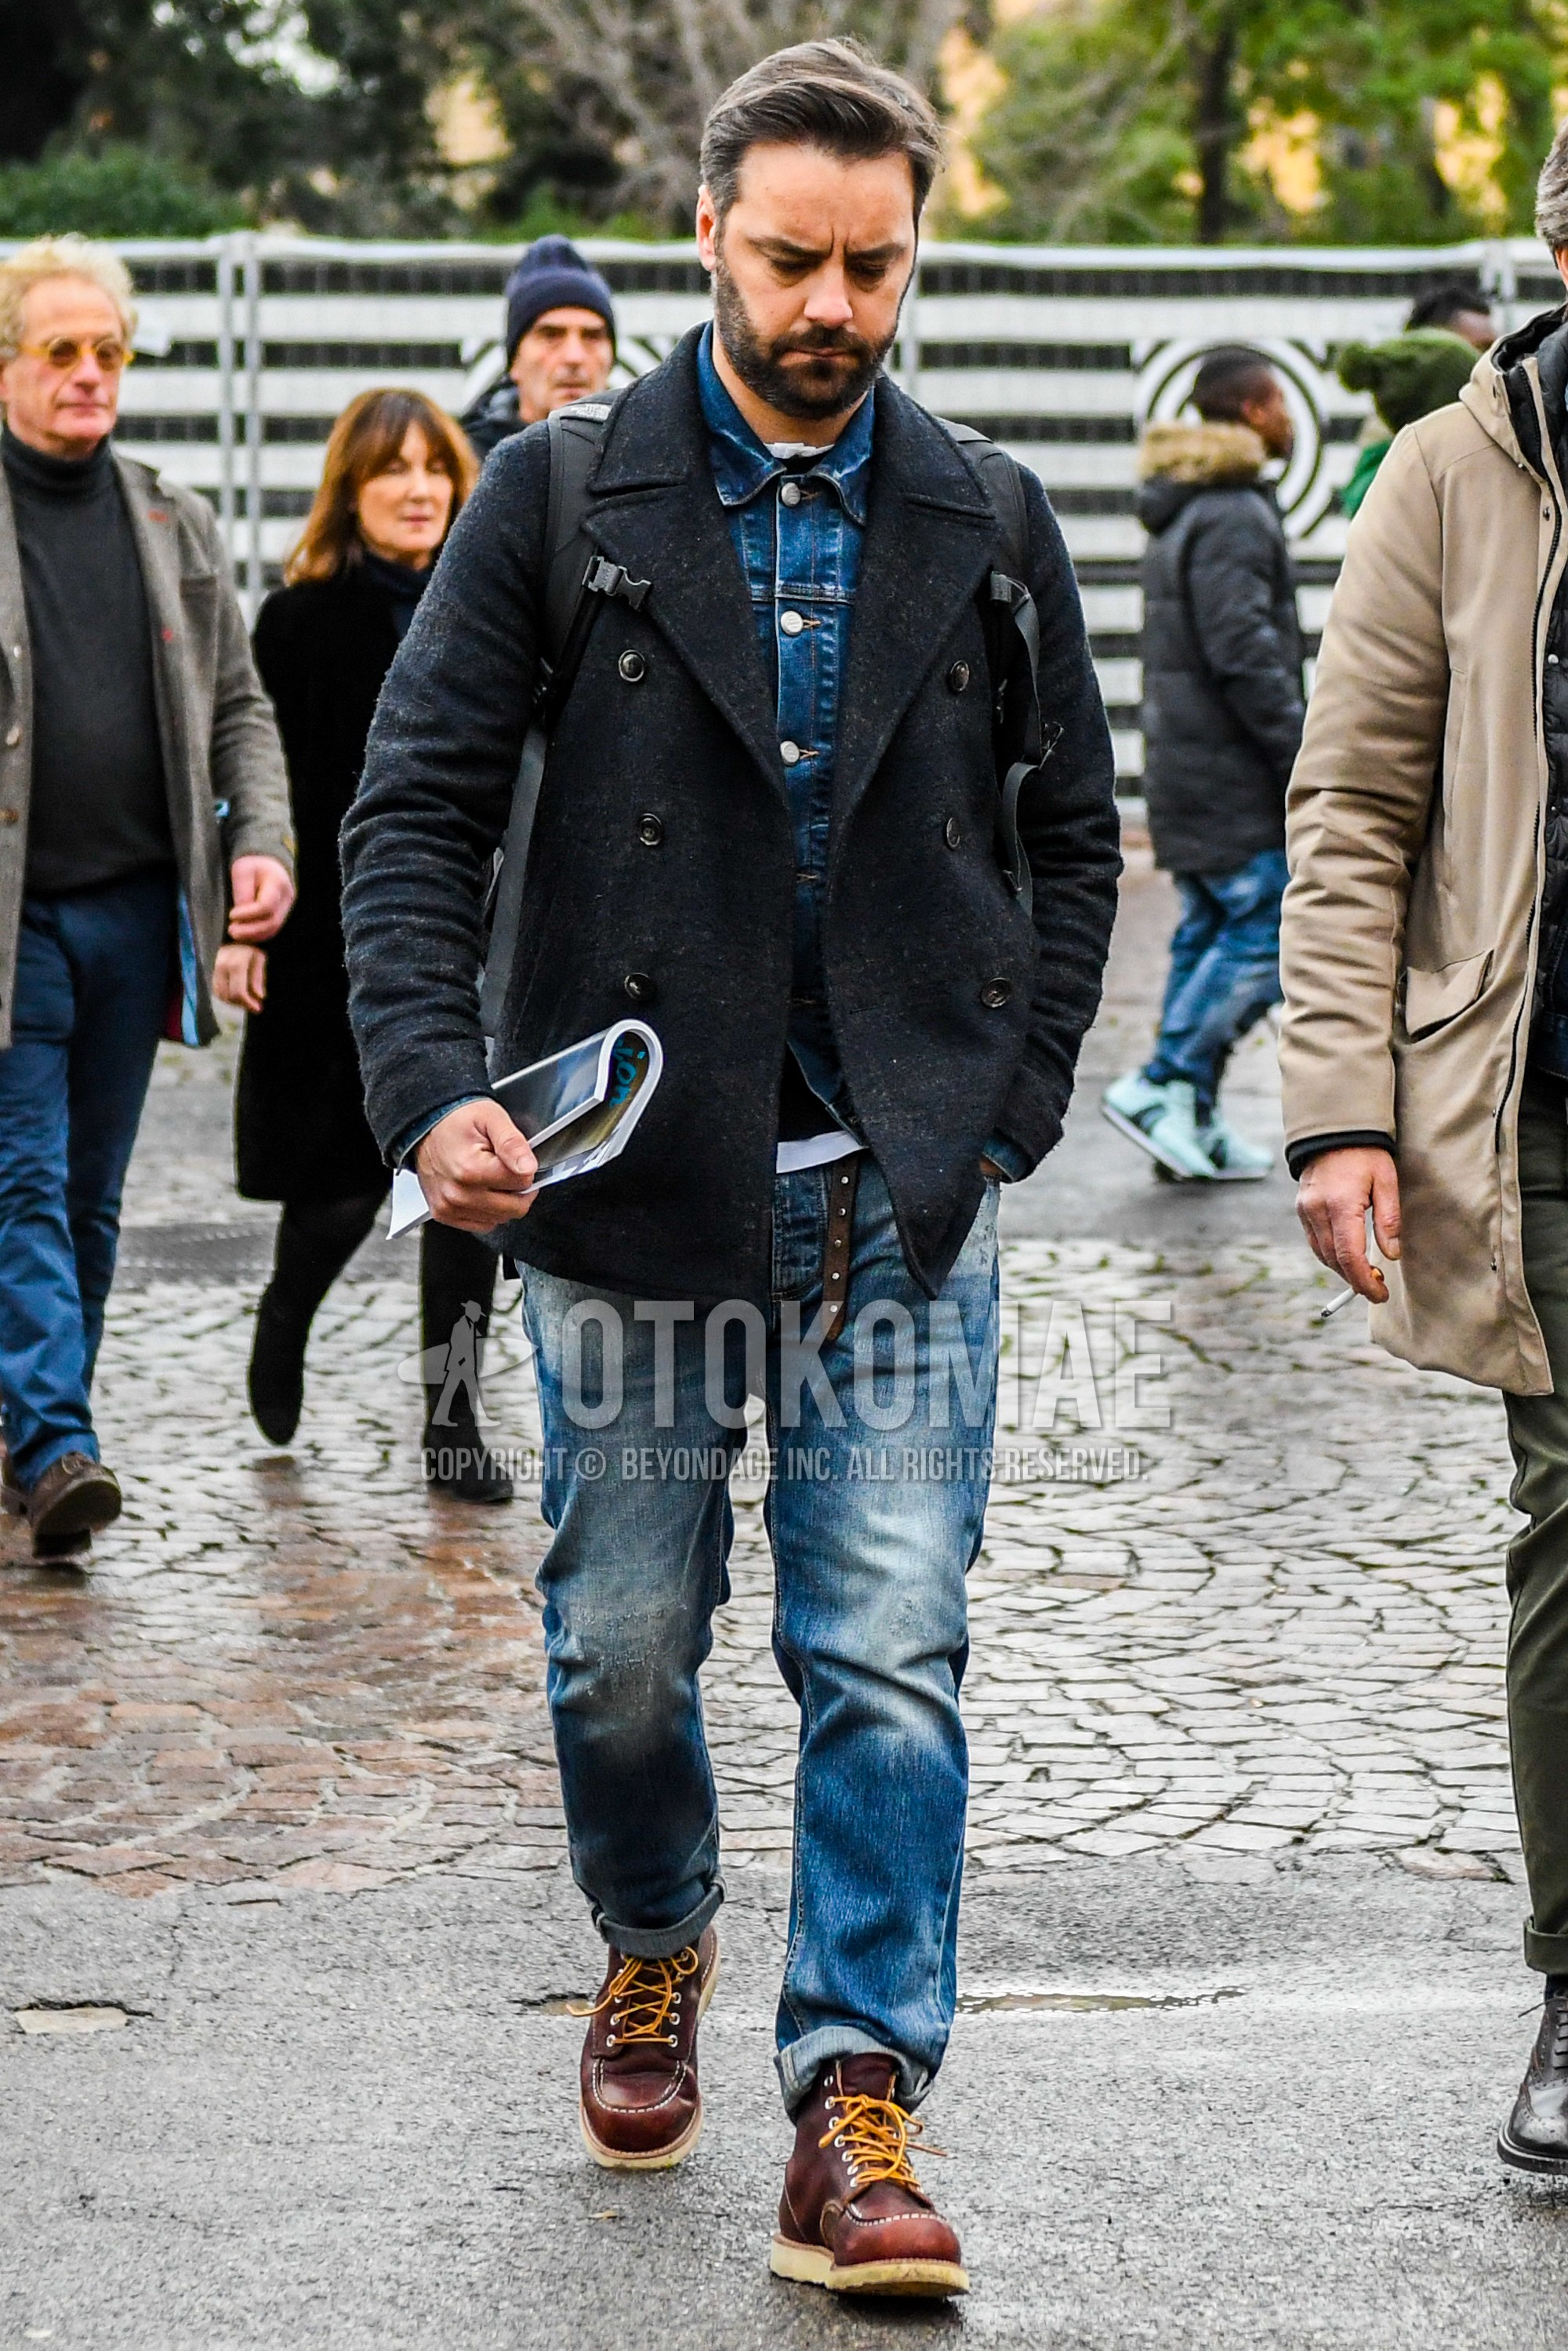 Men's winter outfit with dark gray plain p coat, blue plain denim jacket, blue plain denim/jeans, brown work boots.